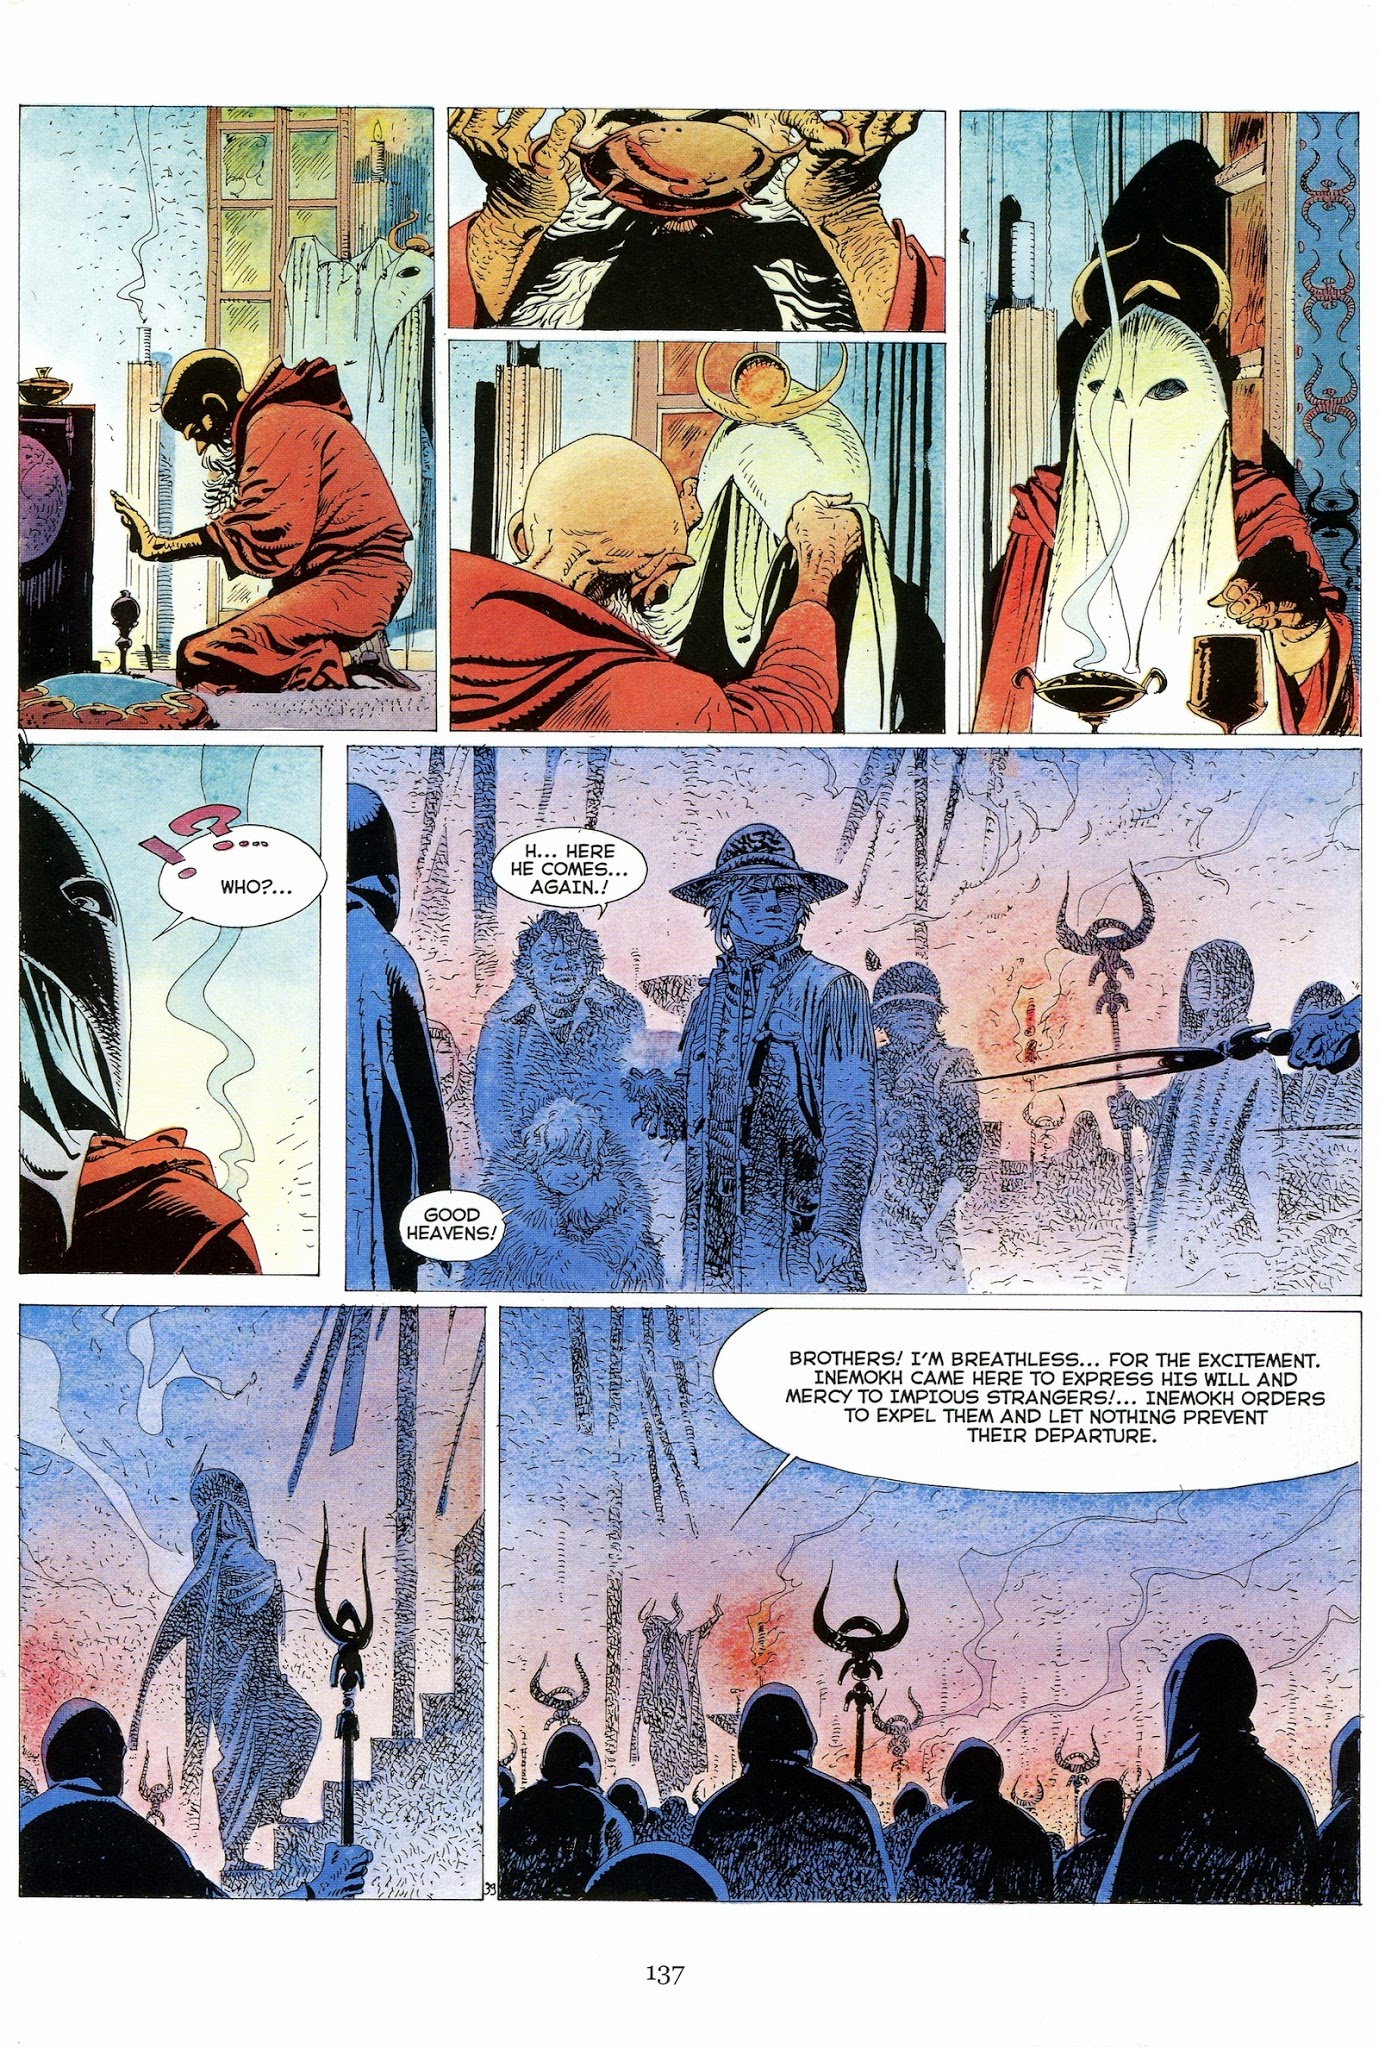 Read online Jeremiah by Hermann comic -  Issue # TPB 2 - 138